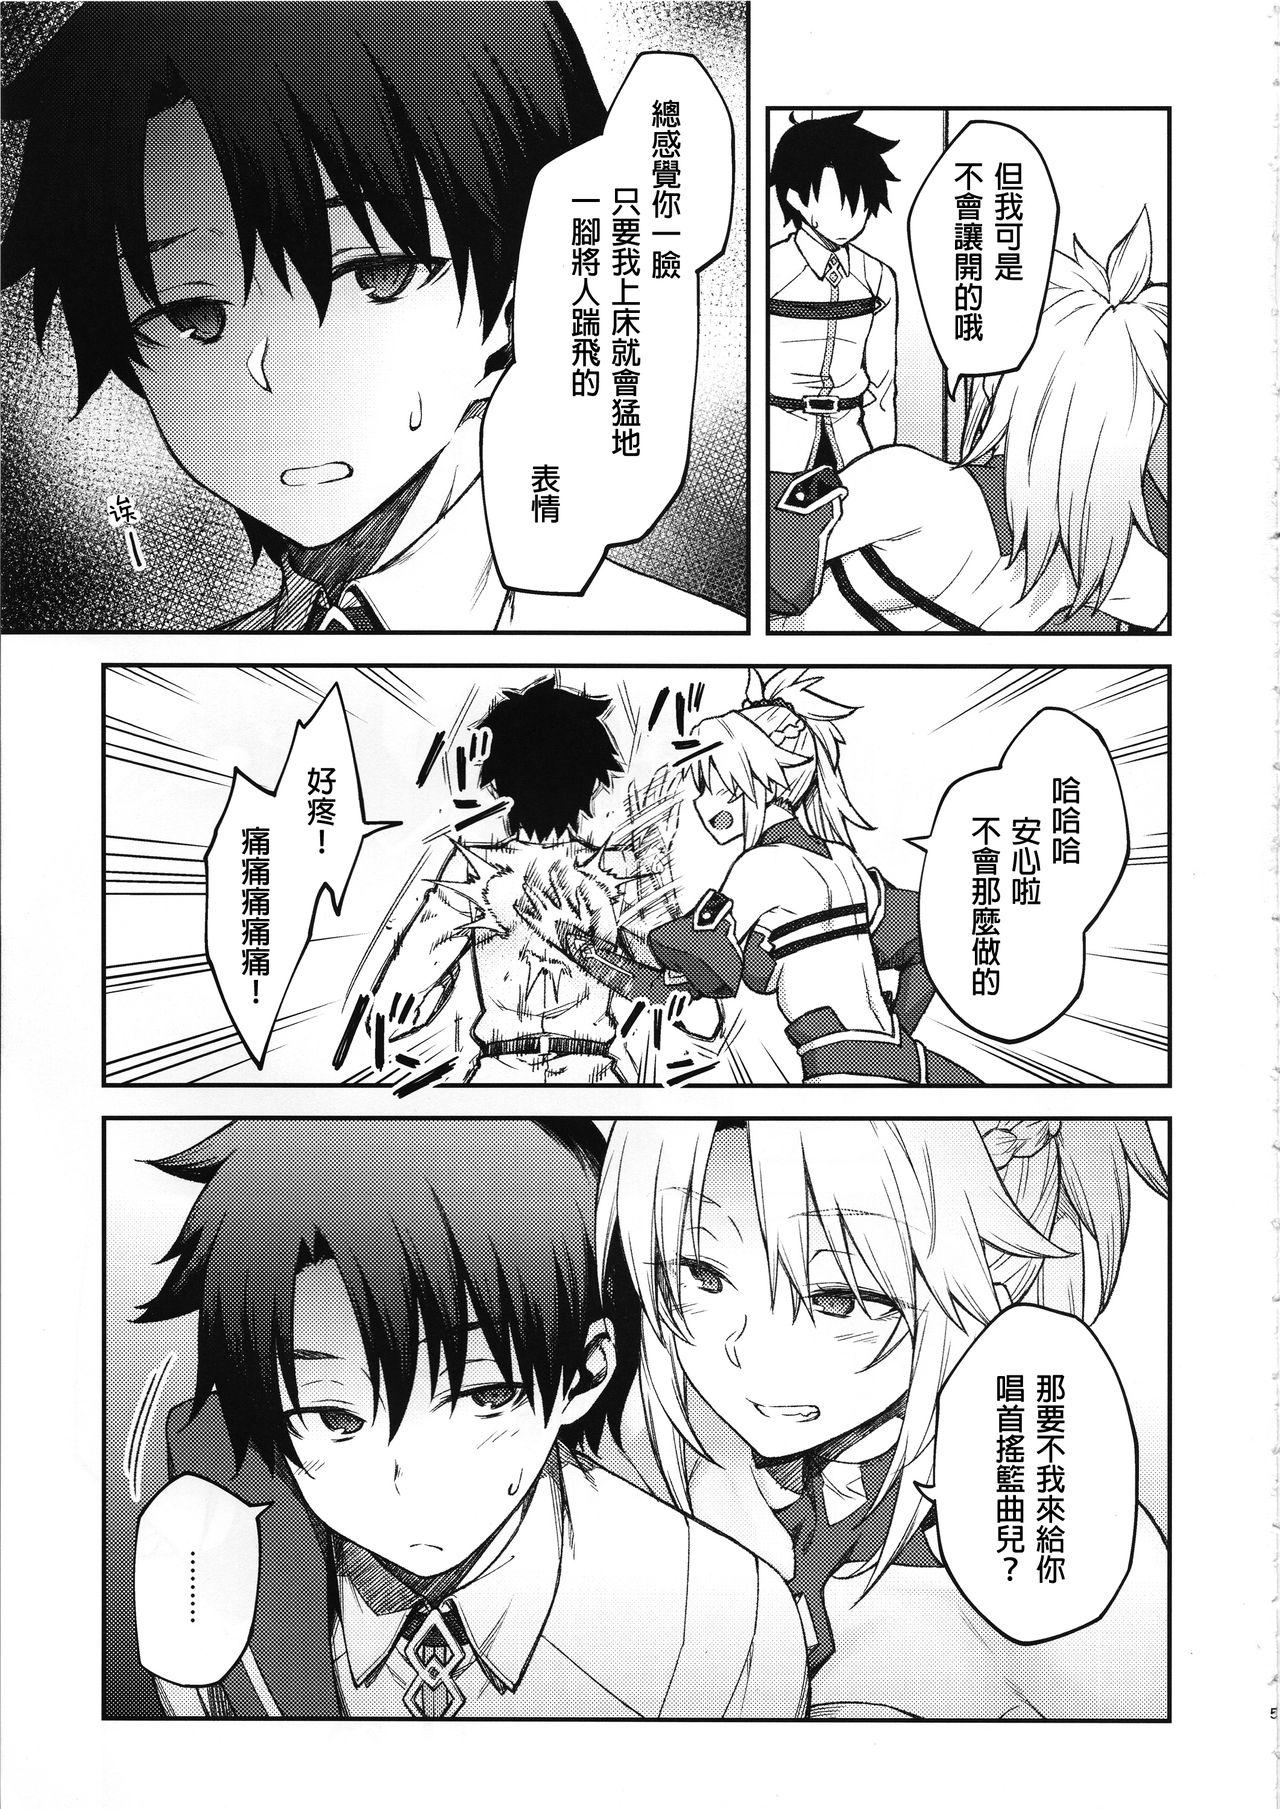 Tease Chaldea Life II - Fate grand order Audition - Page 5